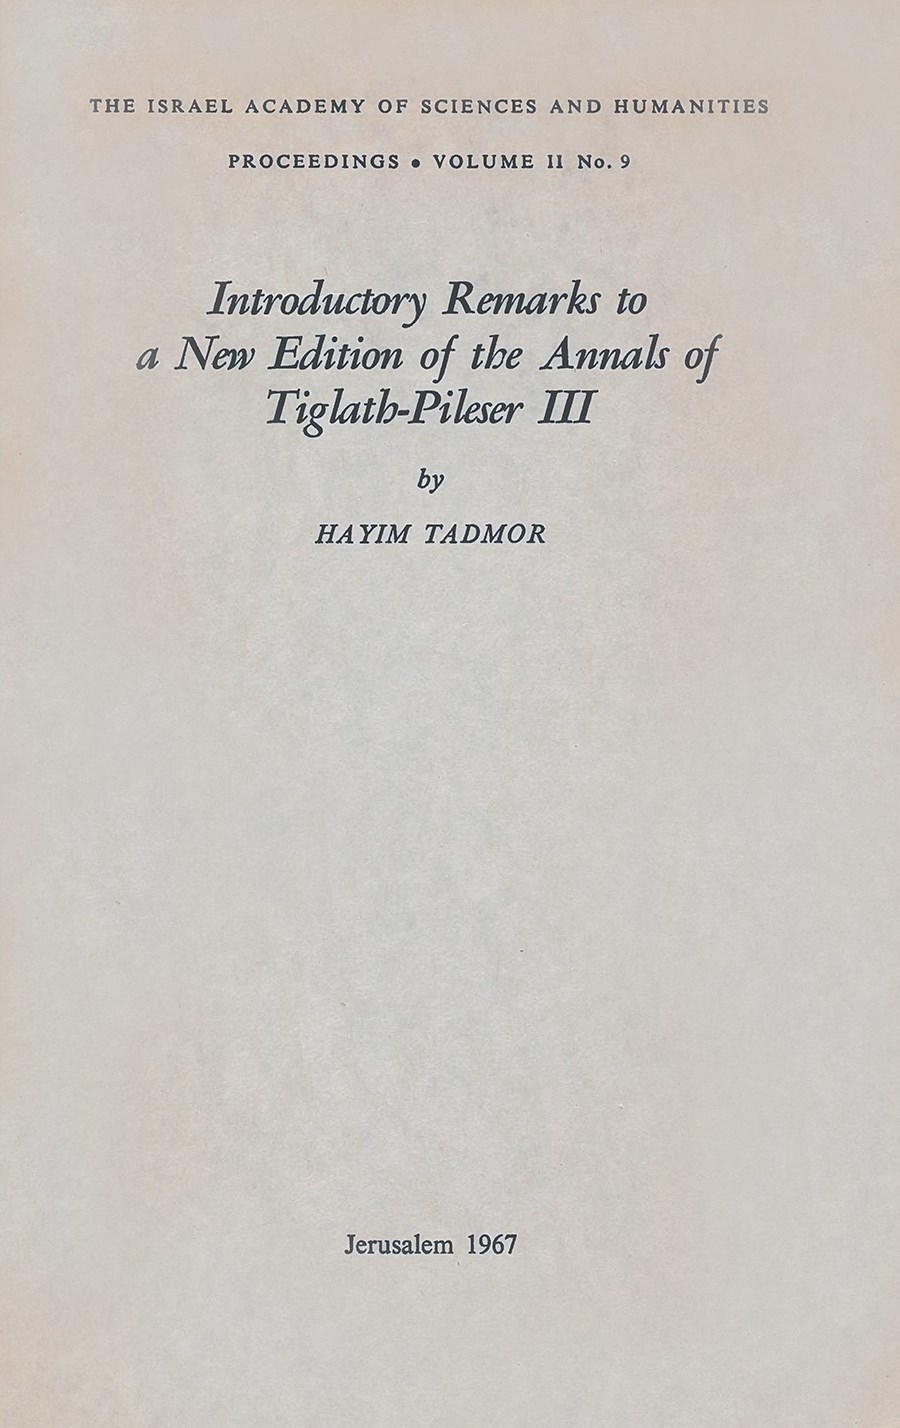 Introductory Remarks to a New Edition of the Annals of Tiglath-Pileser III